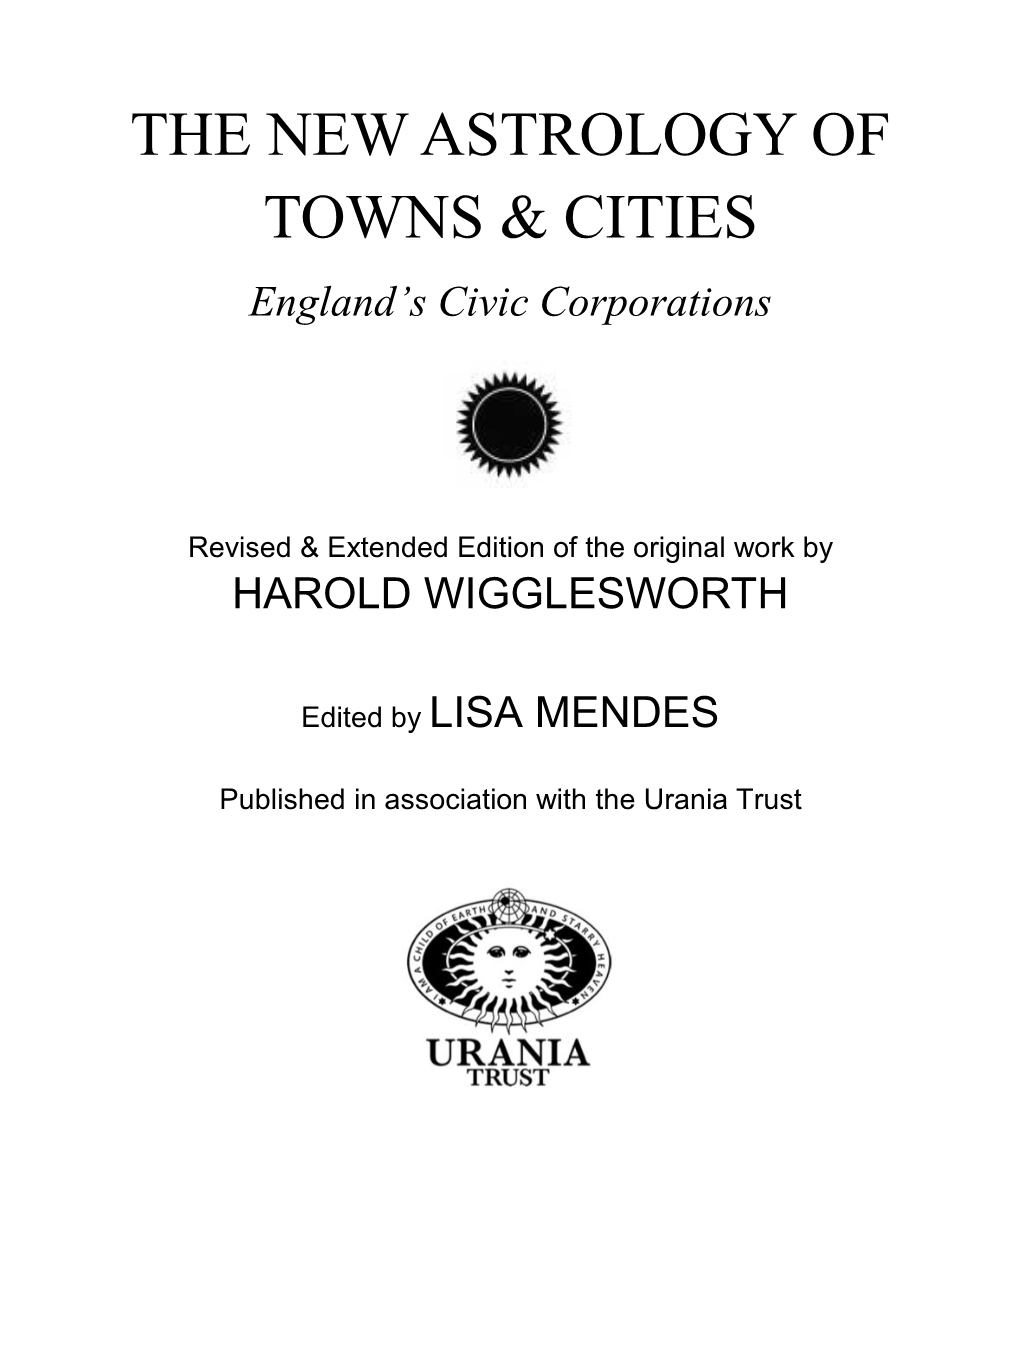 The New Astrology of Towns & Cities